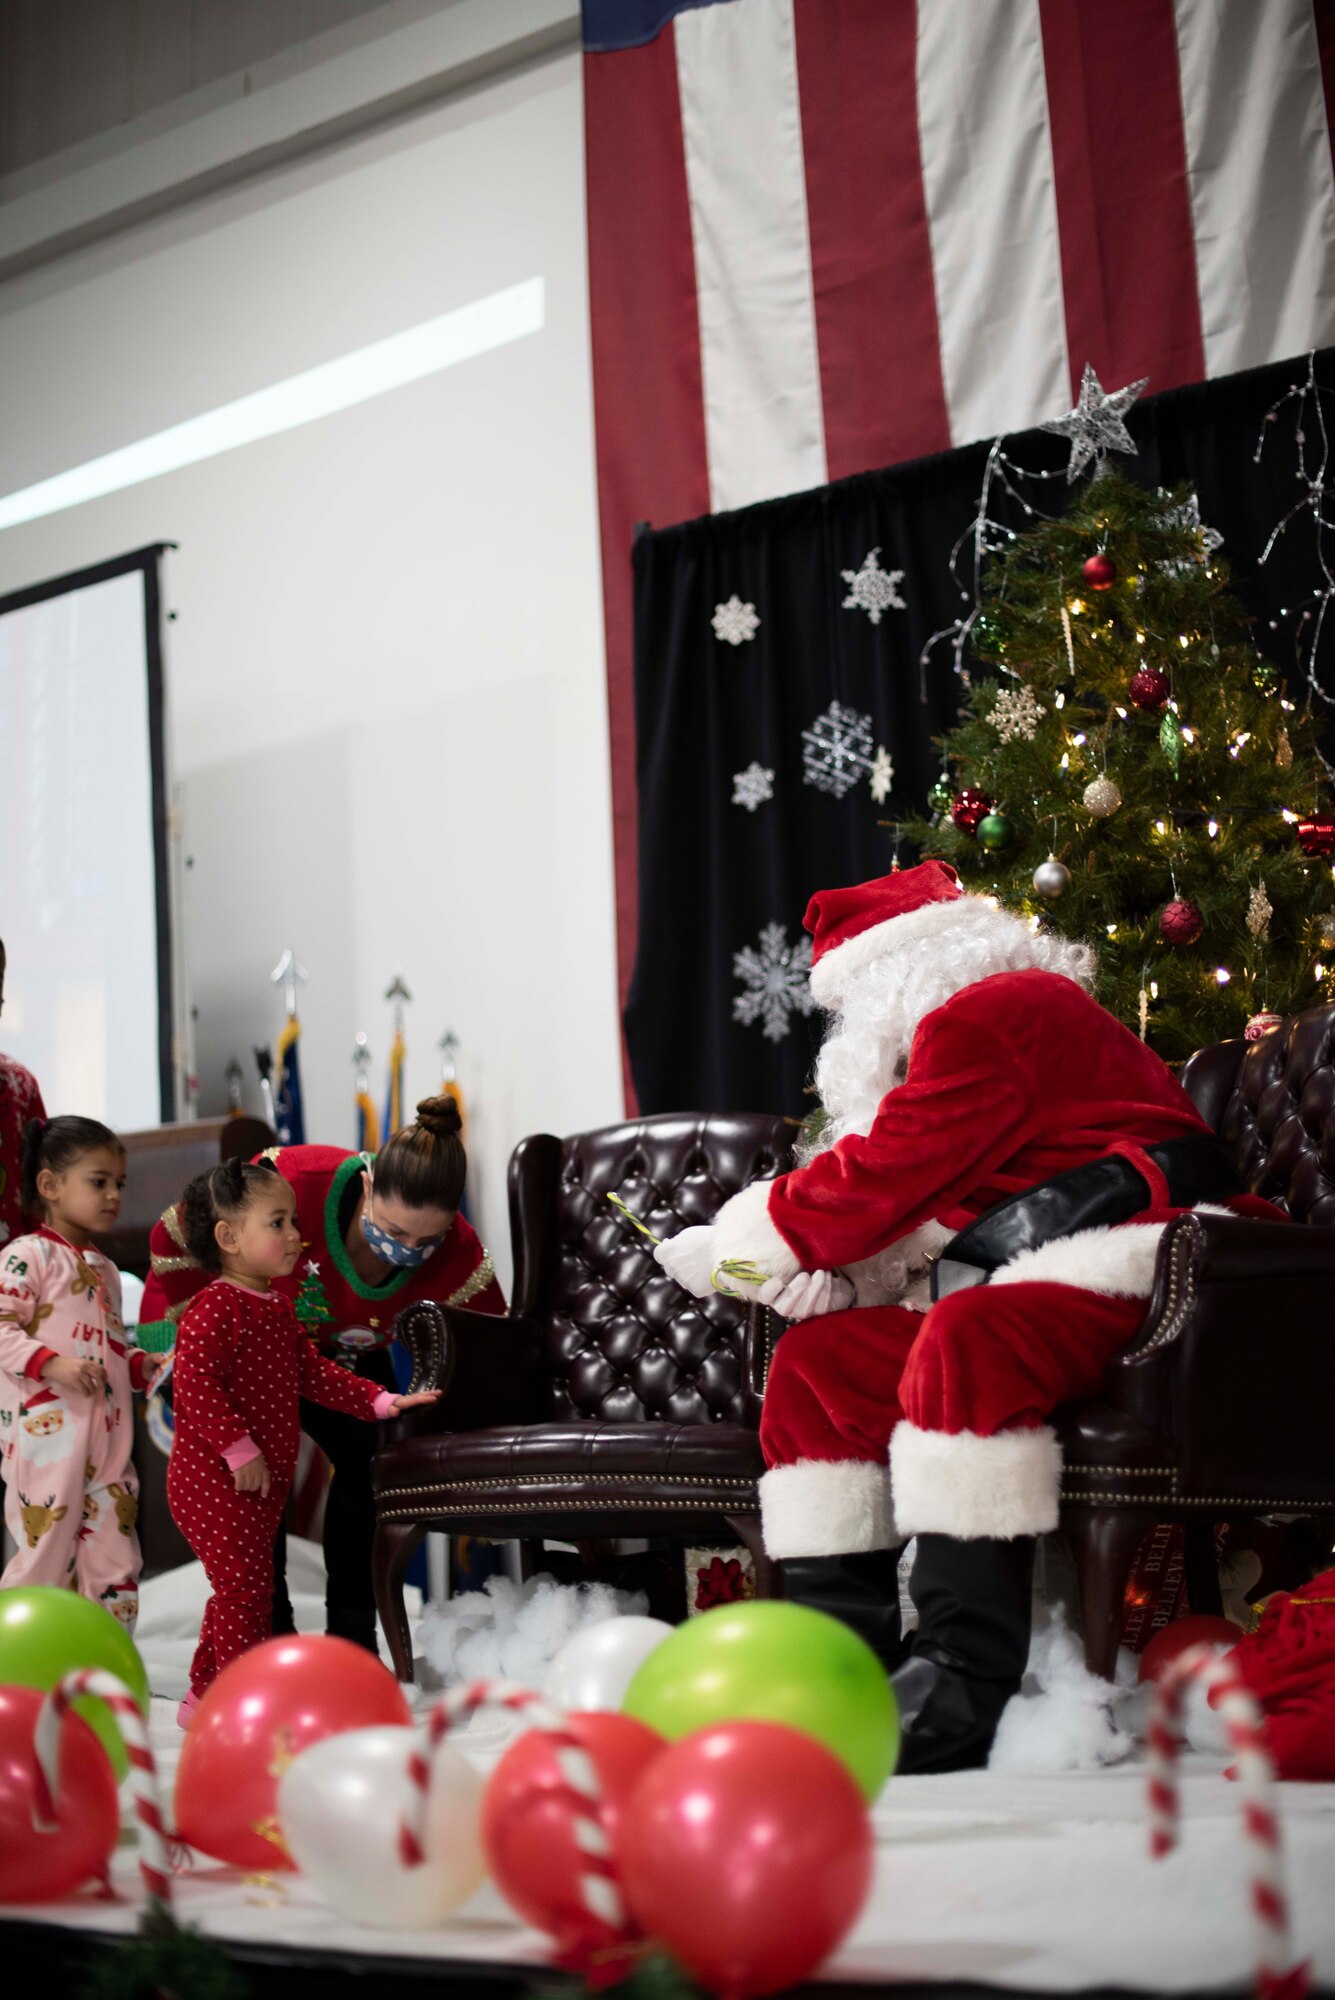 Photos of an event where families got to meet, take a photo with, and receive gifts from Santa Claus.